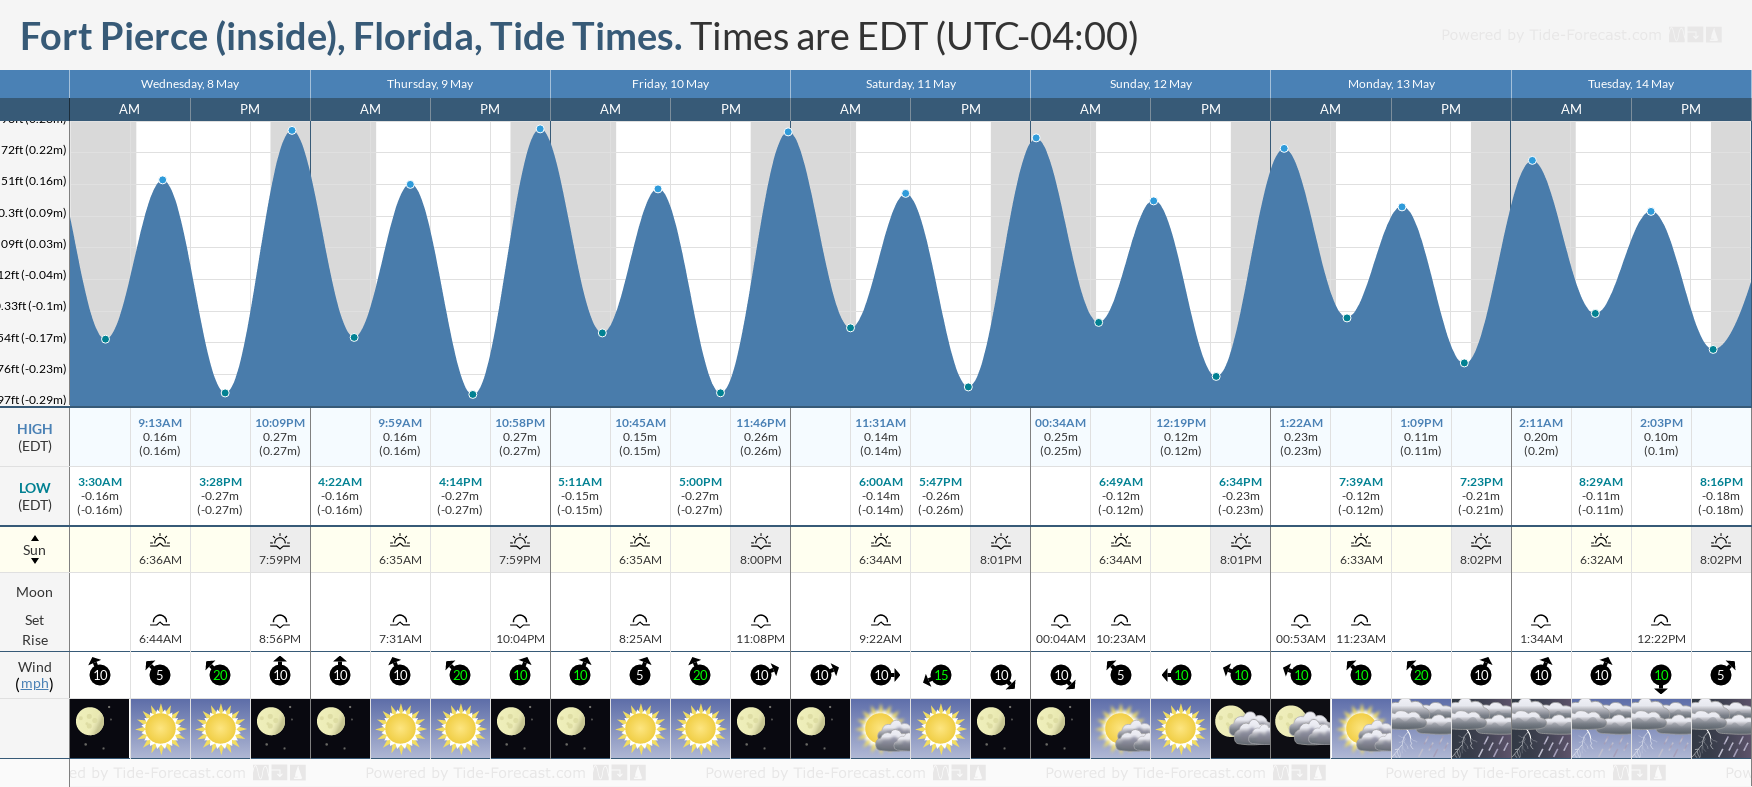 Fort Pierce (inside), Florida Tide Chart including high and low tide times for the next 7 days